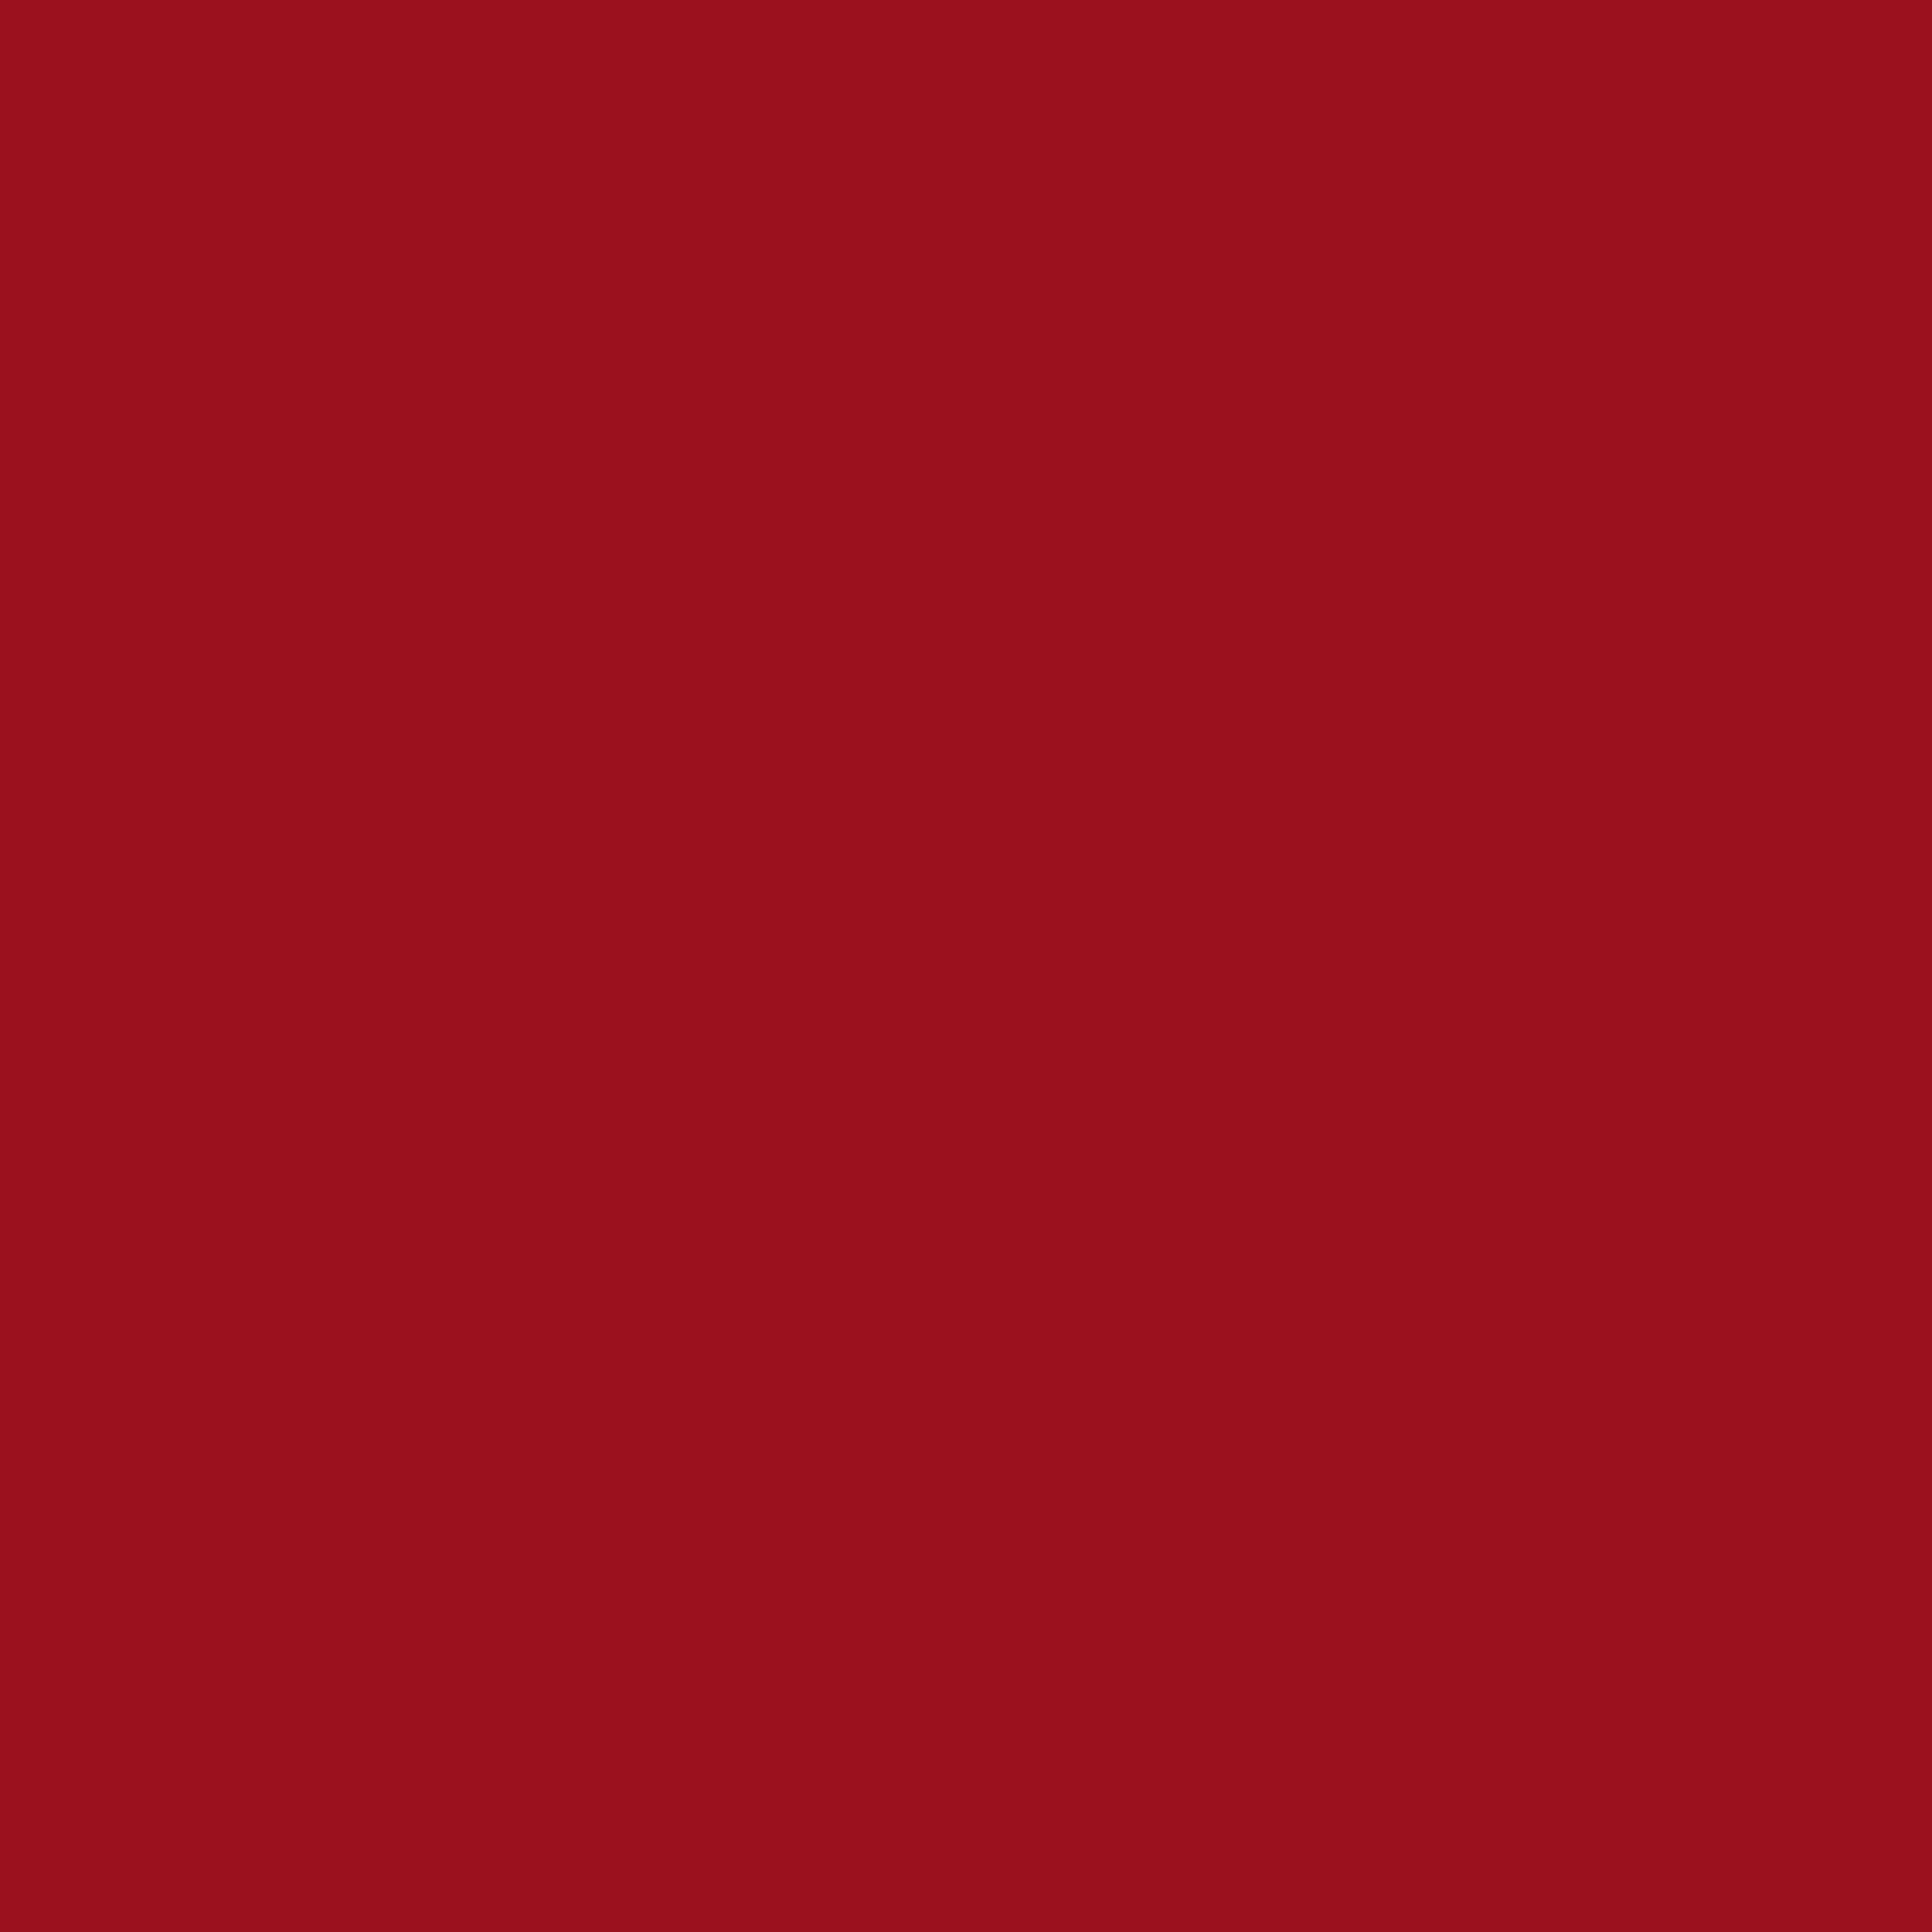 2732x2732 Ruby Red Solid Color Background